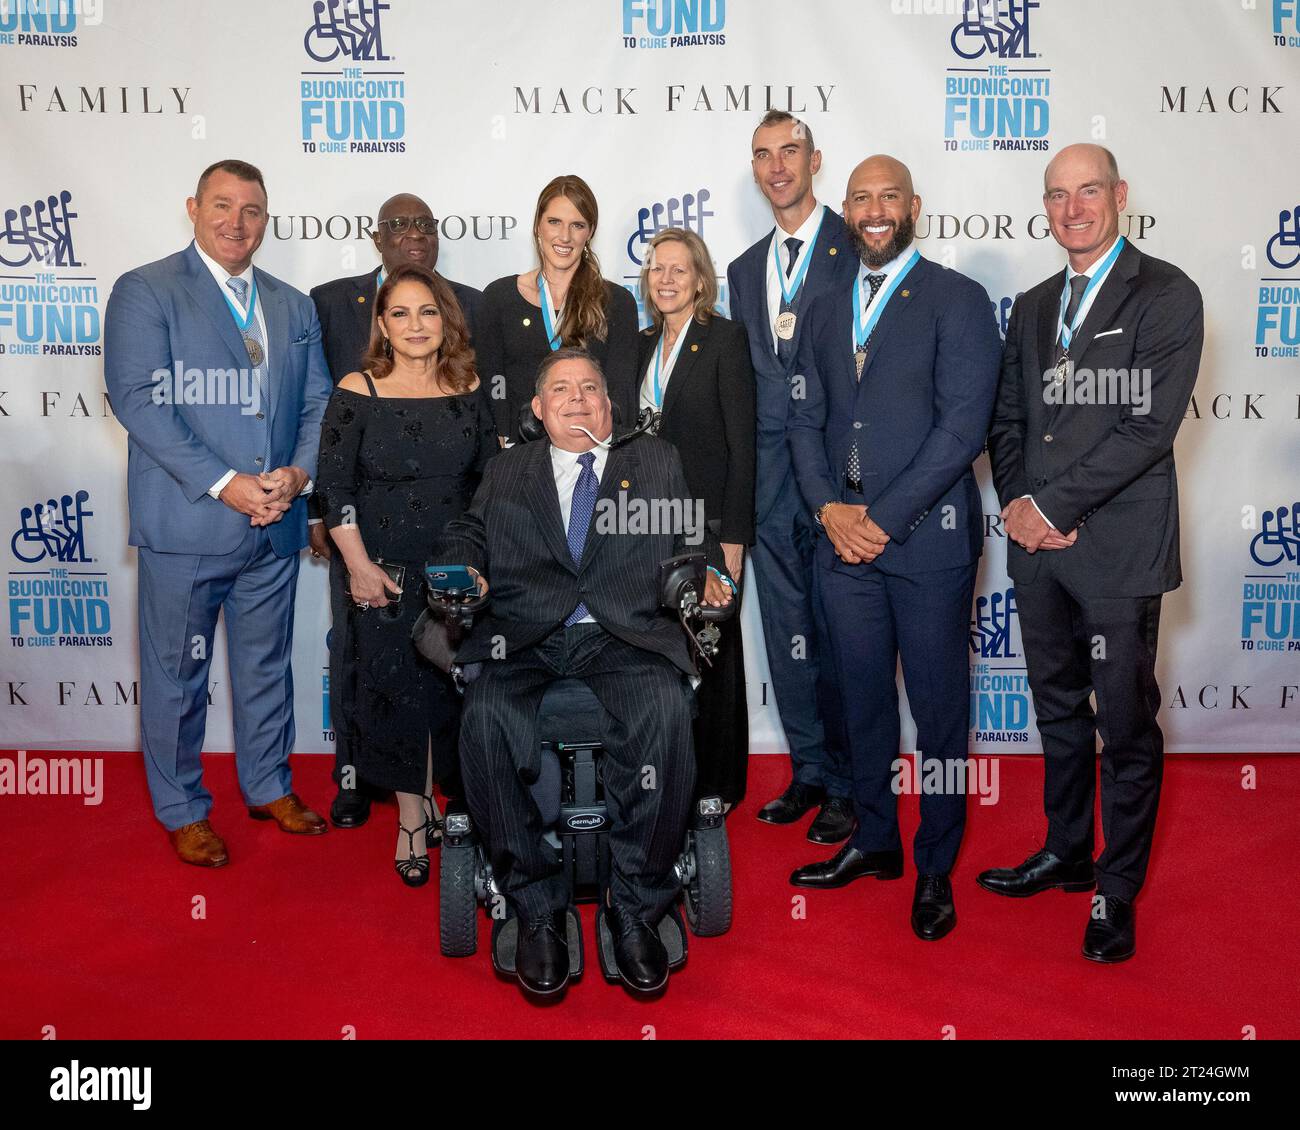 New York, USA. 16th Oct, 2023. (L-R)Jim Thome, Larry Little, Gloria Estefan, Missy Franklin, Marc A. Buoniconti, Val Ackerman, Zdeno Chara, Tim Howard, and Jim Furykarrive on the red carpet for the Buoniconti Fund To Cure Paralysis' 38th Annual Great Sports Legends Dinner at the Marriott Marquis in New York, New York, on Oct. 16, 2023. (Photo by Gabriele Holtermann/Sipa USA) Credit: Sipa USA/Alamy Live News Stock Photo